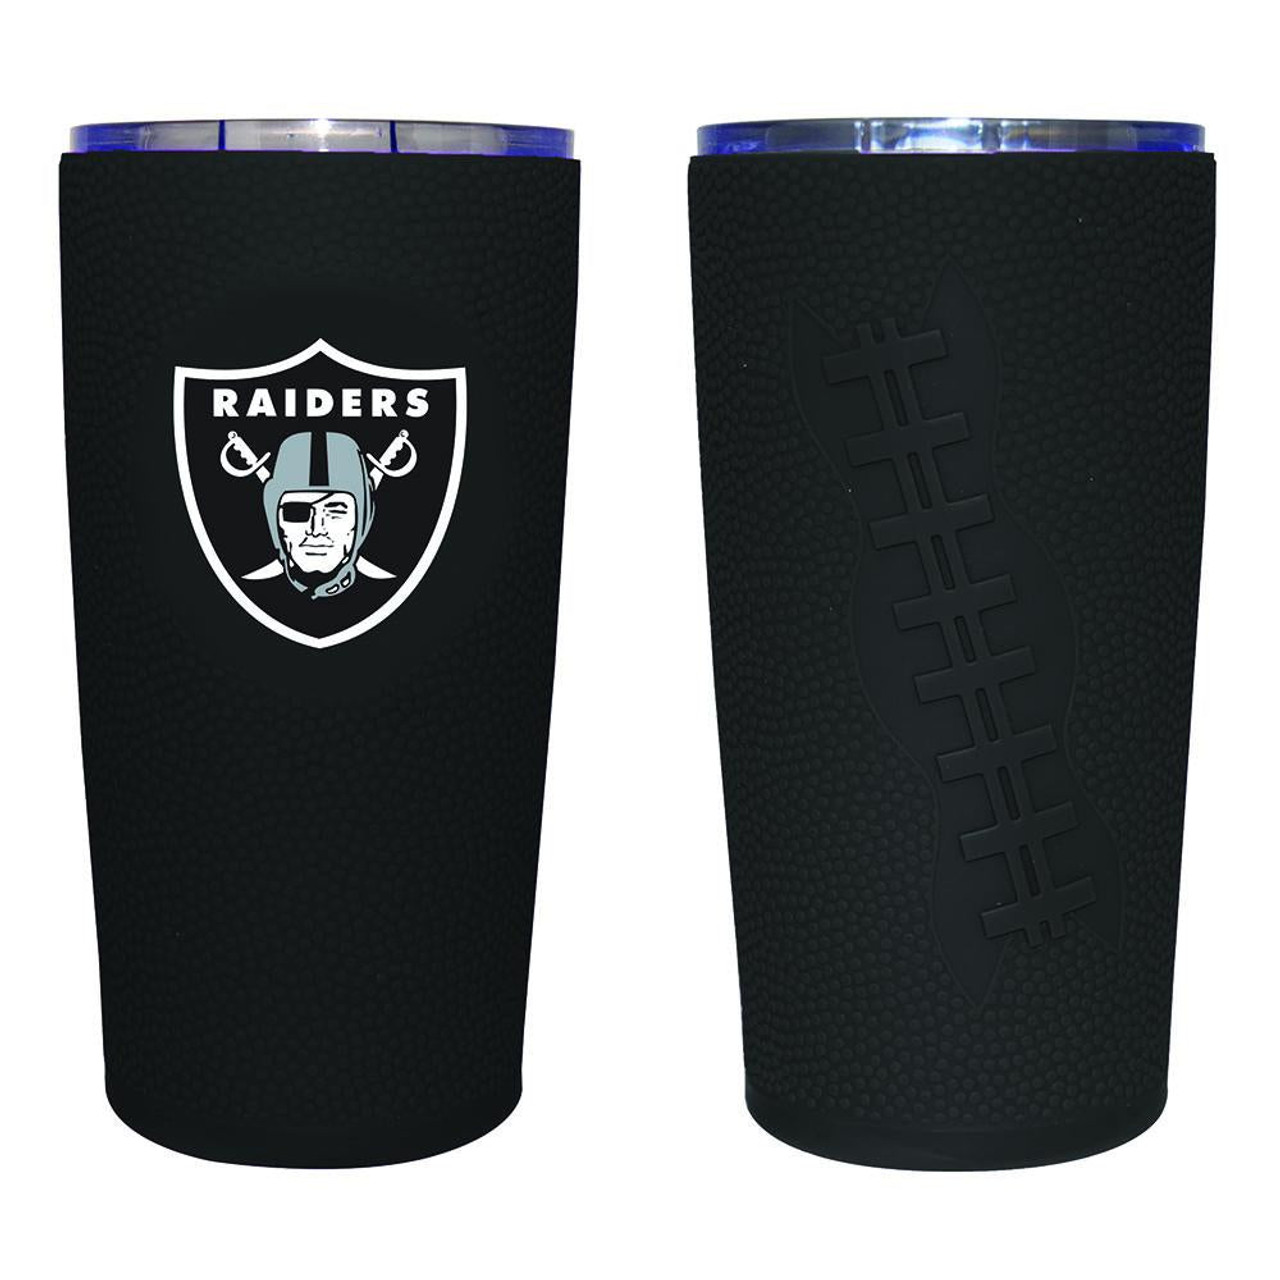 https://cdn11.bigcommerce.com/s-qq5h9nclzt/images/stencil/1280x1280/products/271071/199324/las-vegas-raiders-20-oz-stainless-steel-tumbler-w-silicone-wrap_mainProductImage_Full__31082.1691179147.jpg?c=1